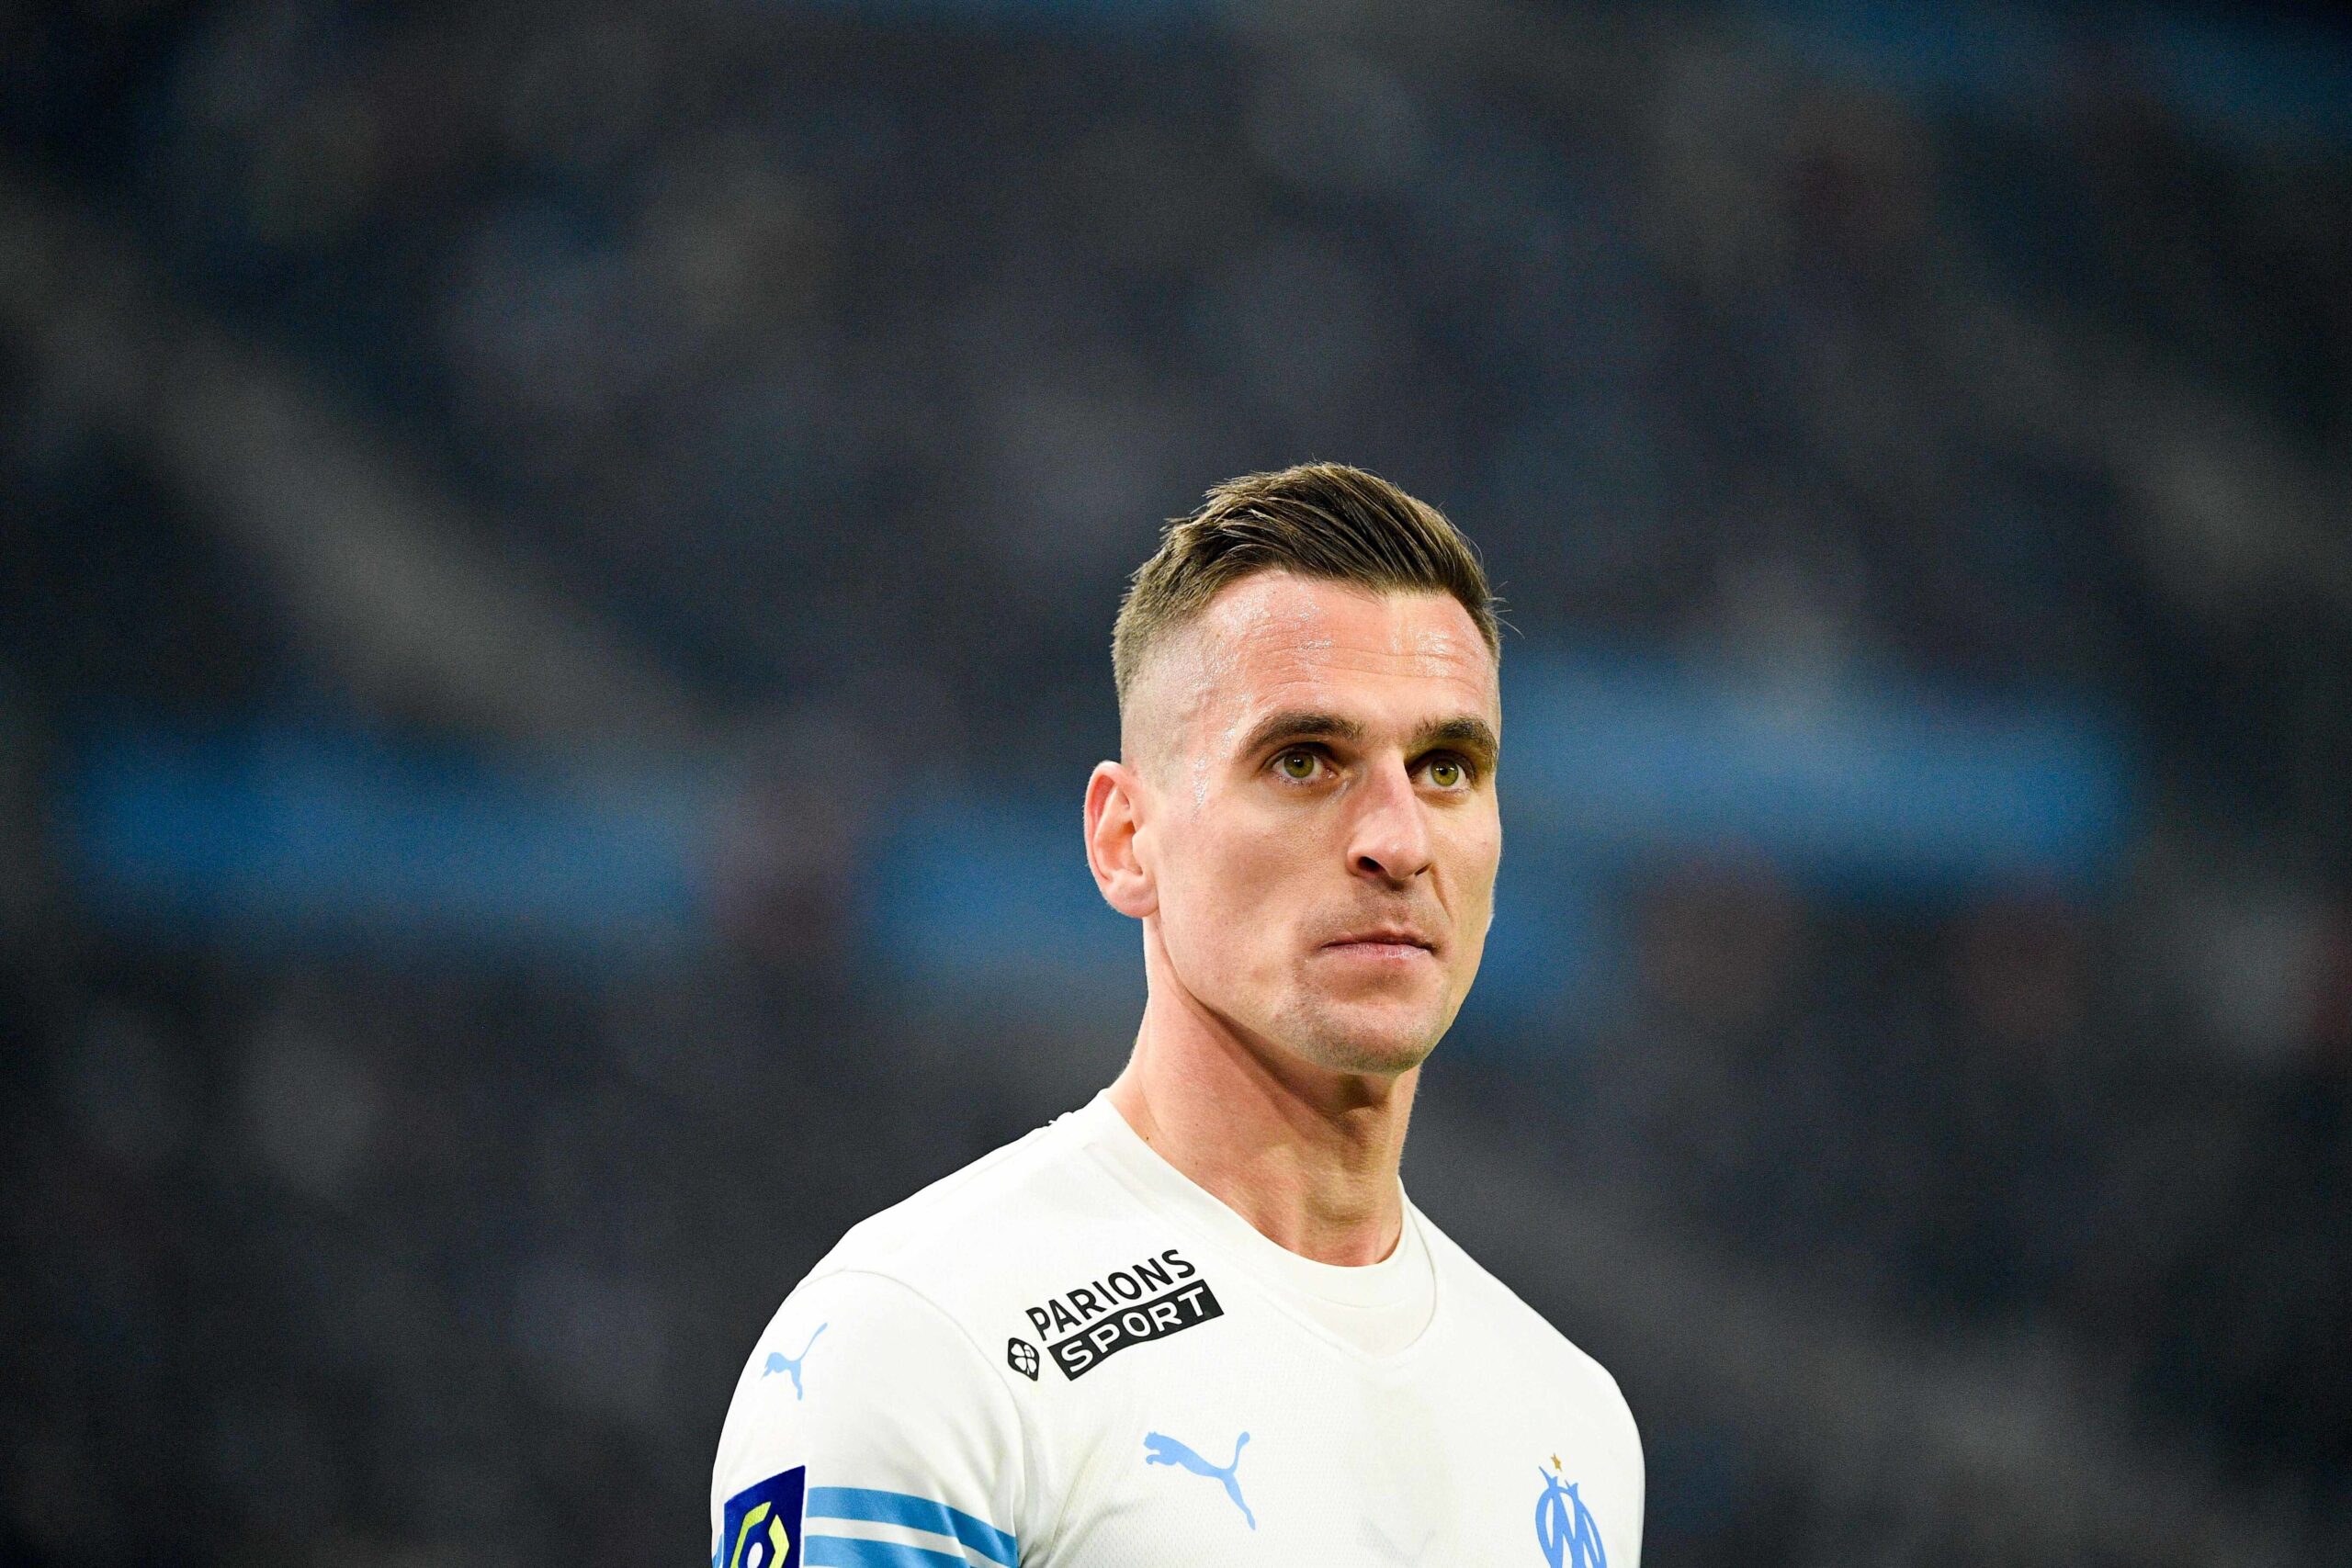 Juventus could lay the glove on Milik – Foot11.com